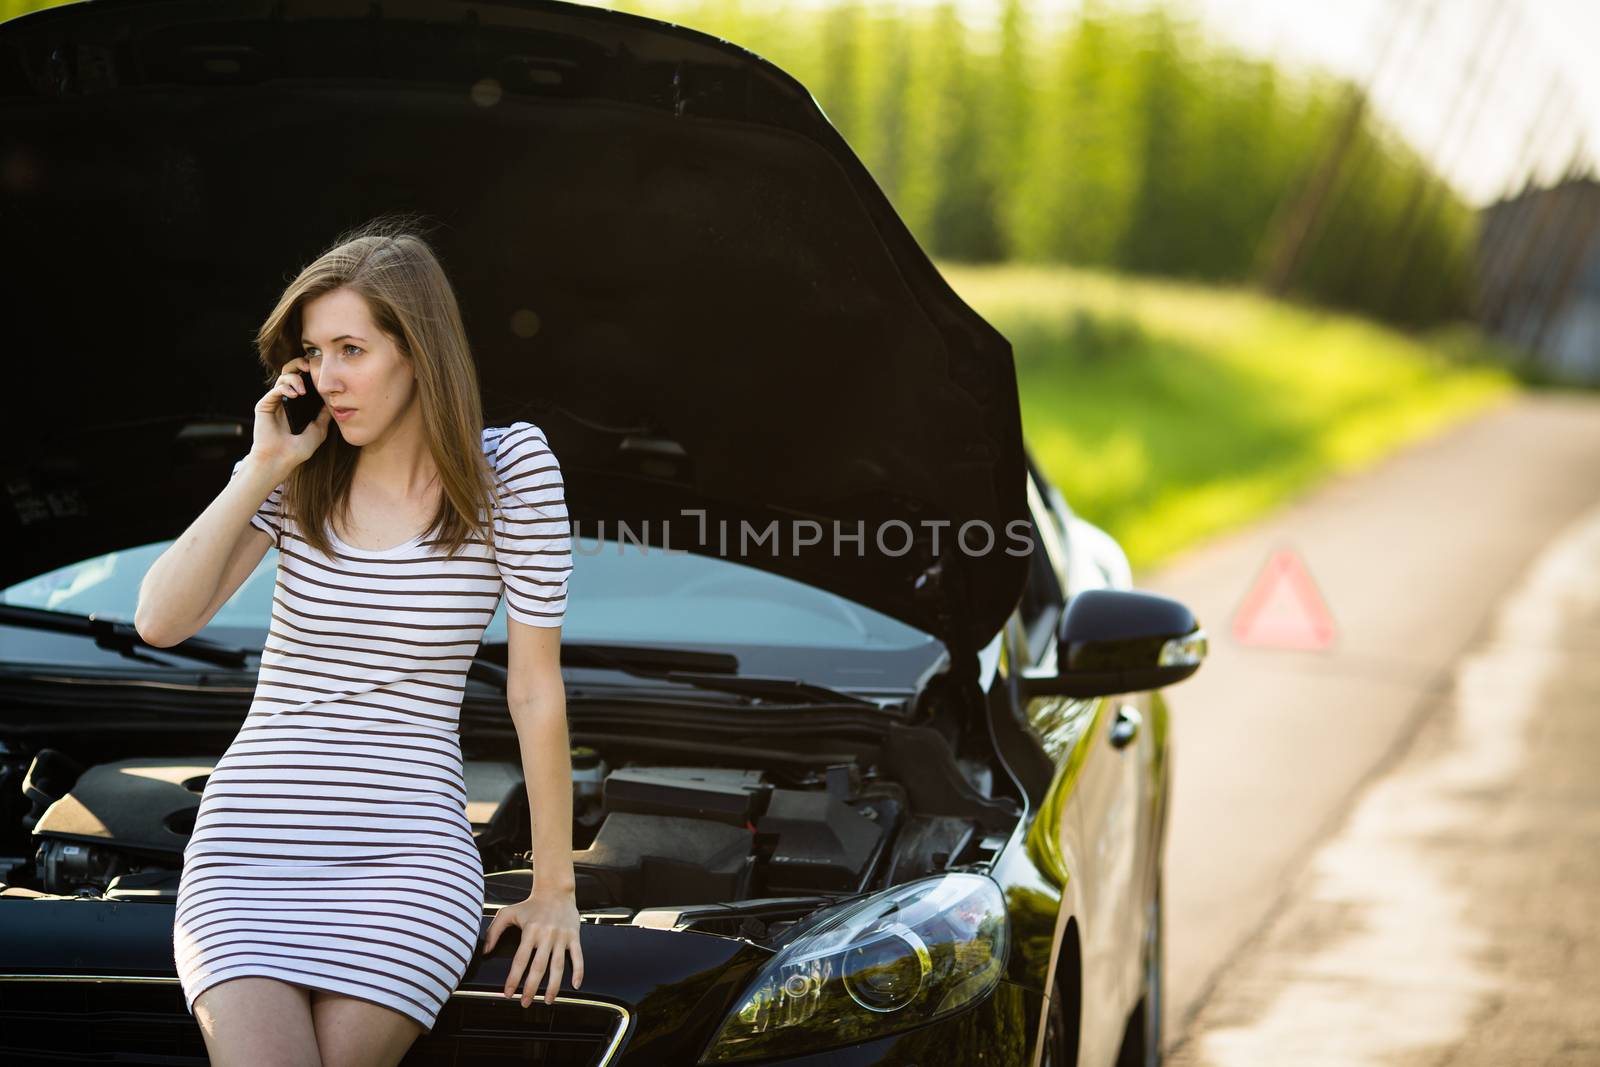 Pretty, young woman calling the roadside service/assistance after her car has broken down